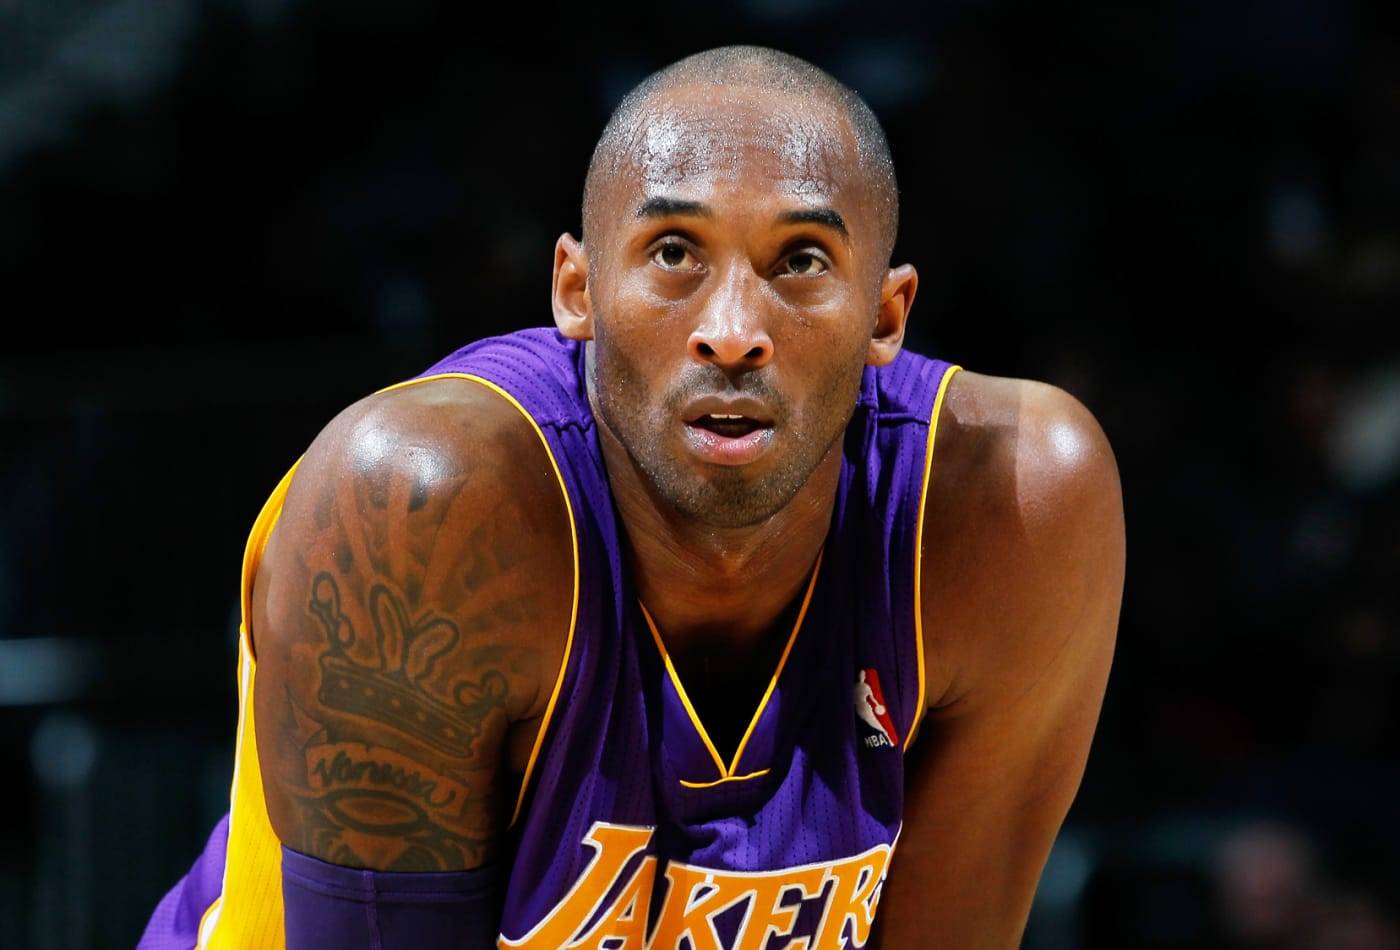 Tribute to “Kobe Bryant” – one year remembrance